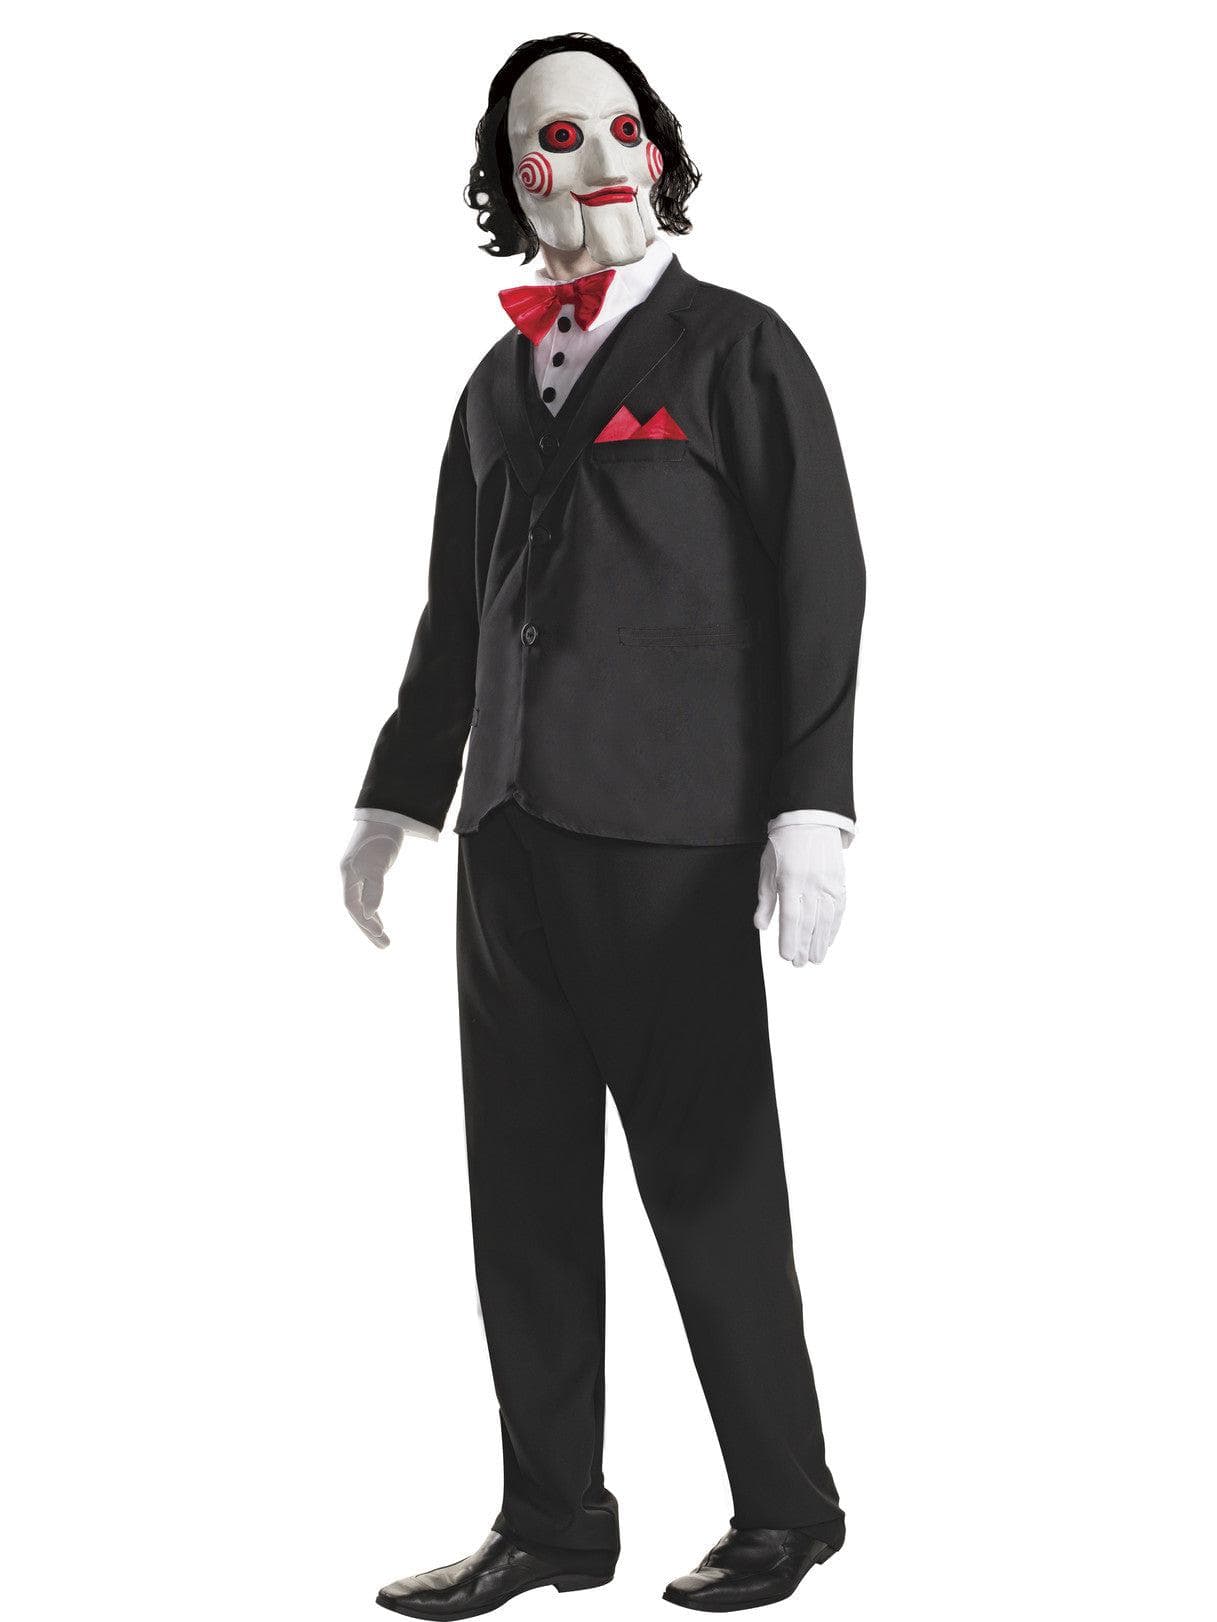 Adult Saw Billy Costume - costumes.com